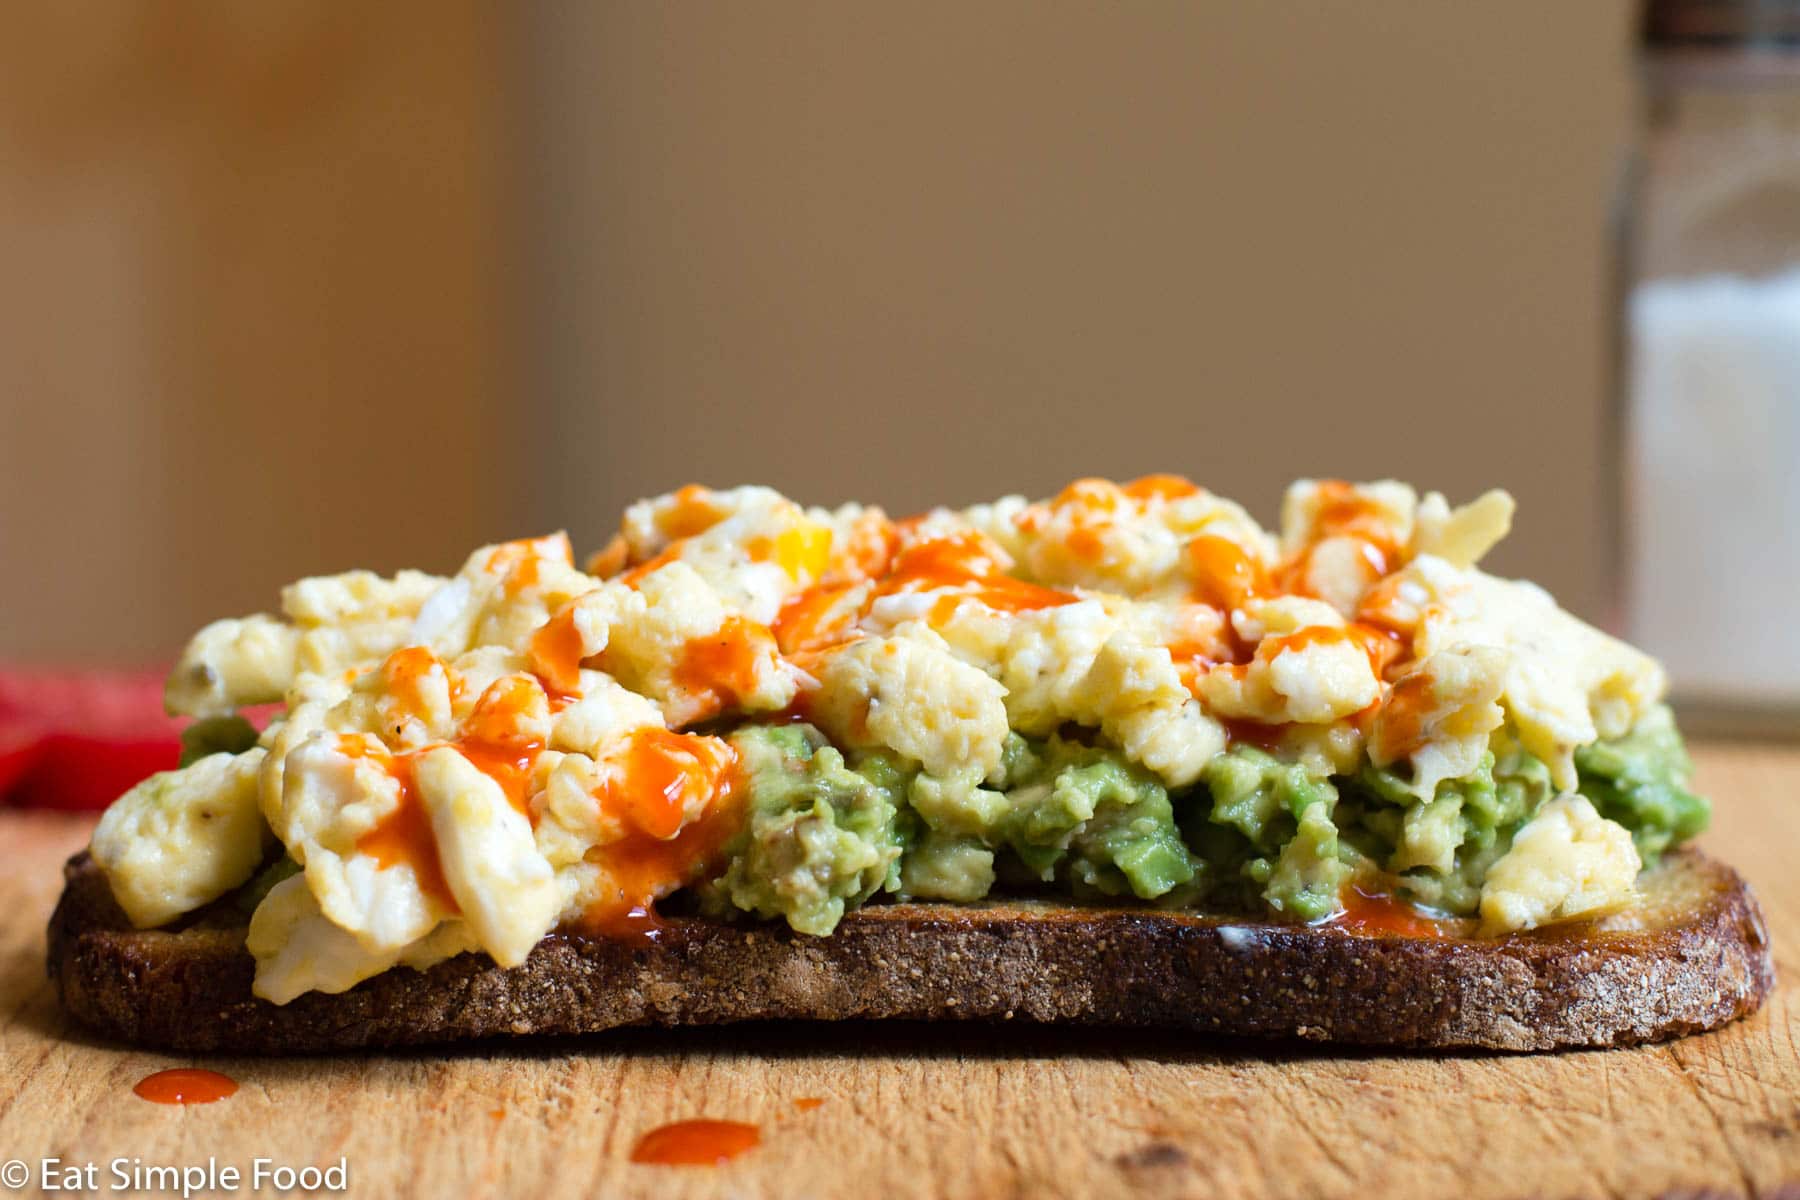 Side View Of Toast with Mashed Avocado, Scrambled Egg, and Hot Sauce On a Cutting Board